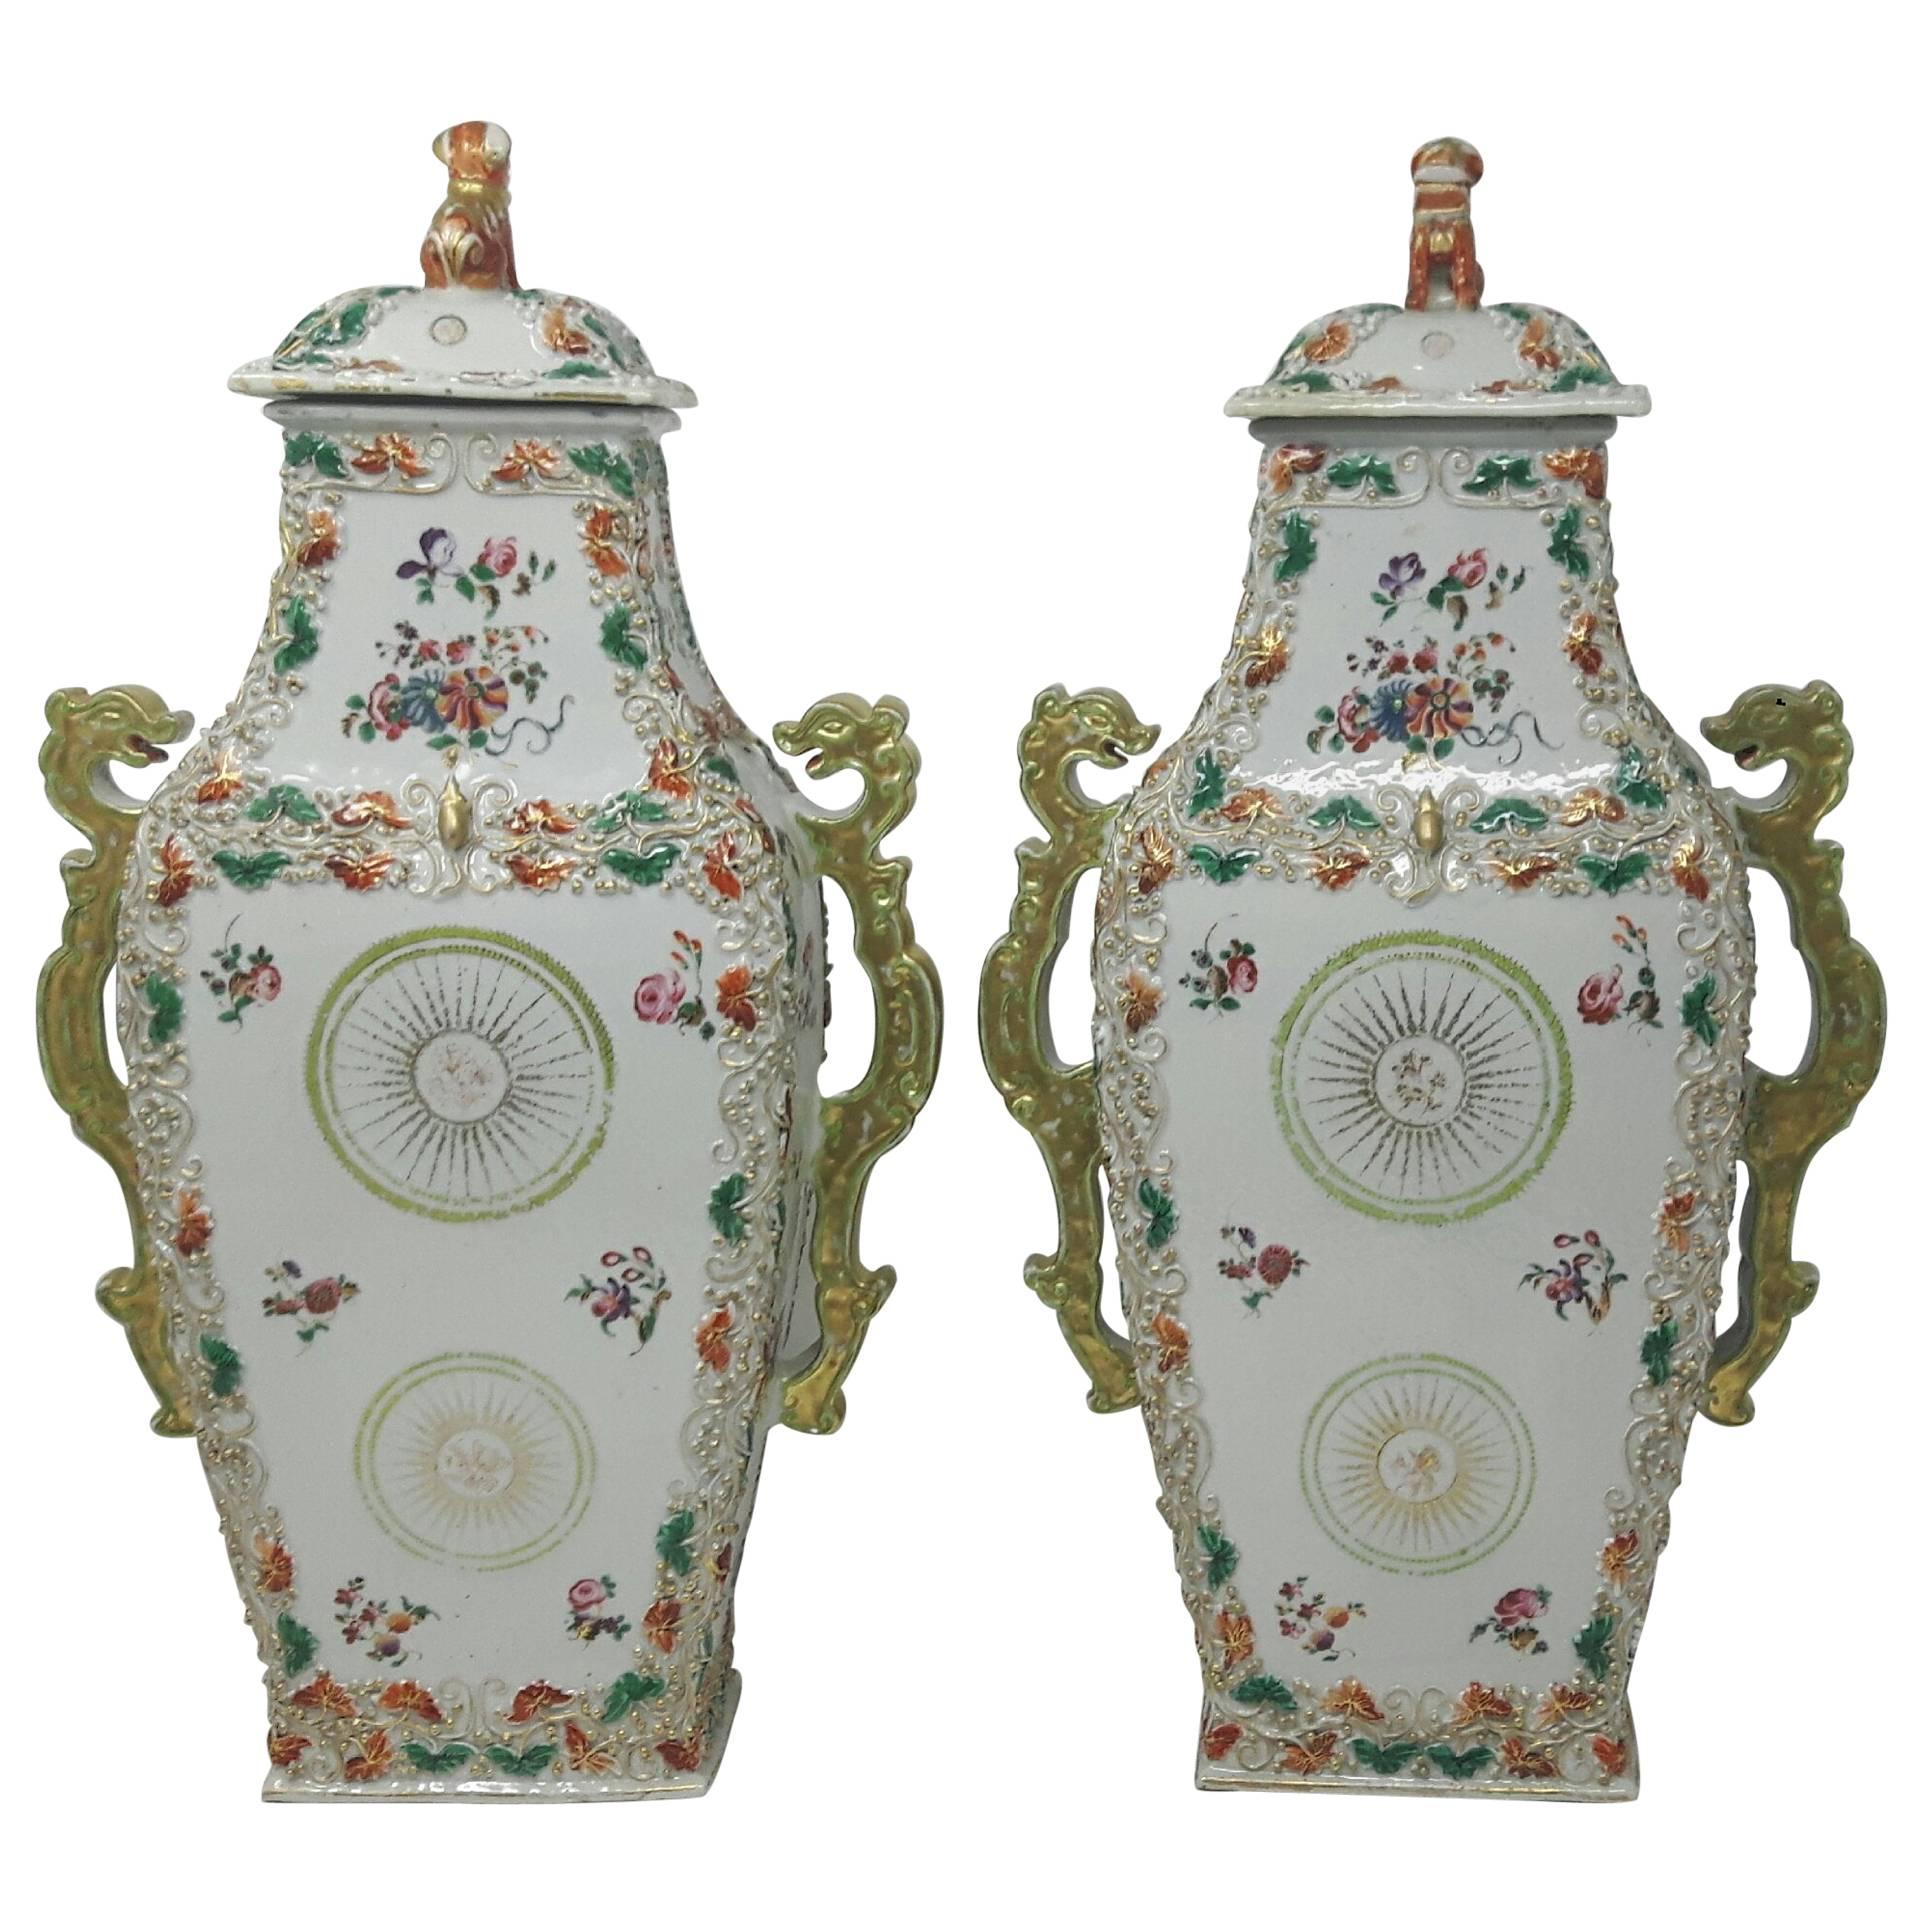 18th Century Chinese Export Famille Rose Vases, circa 1750